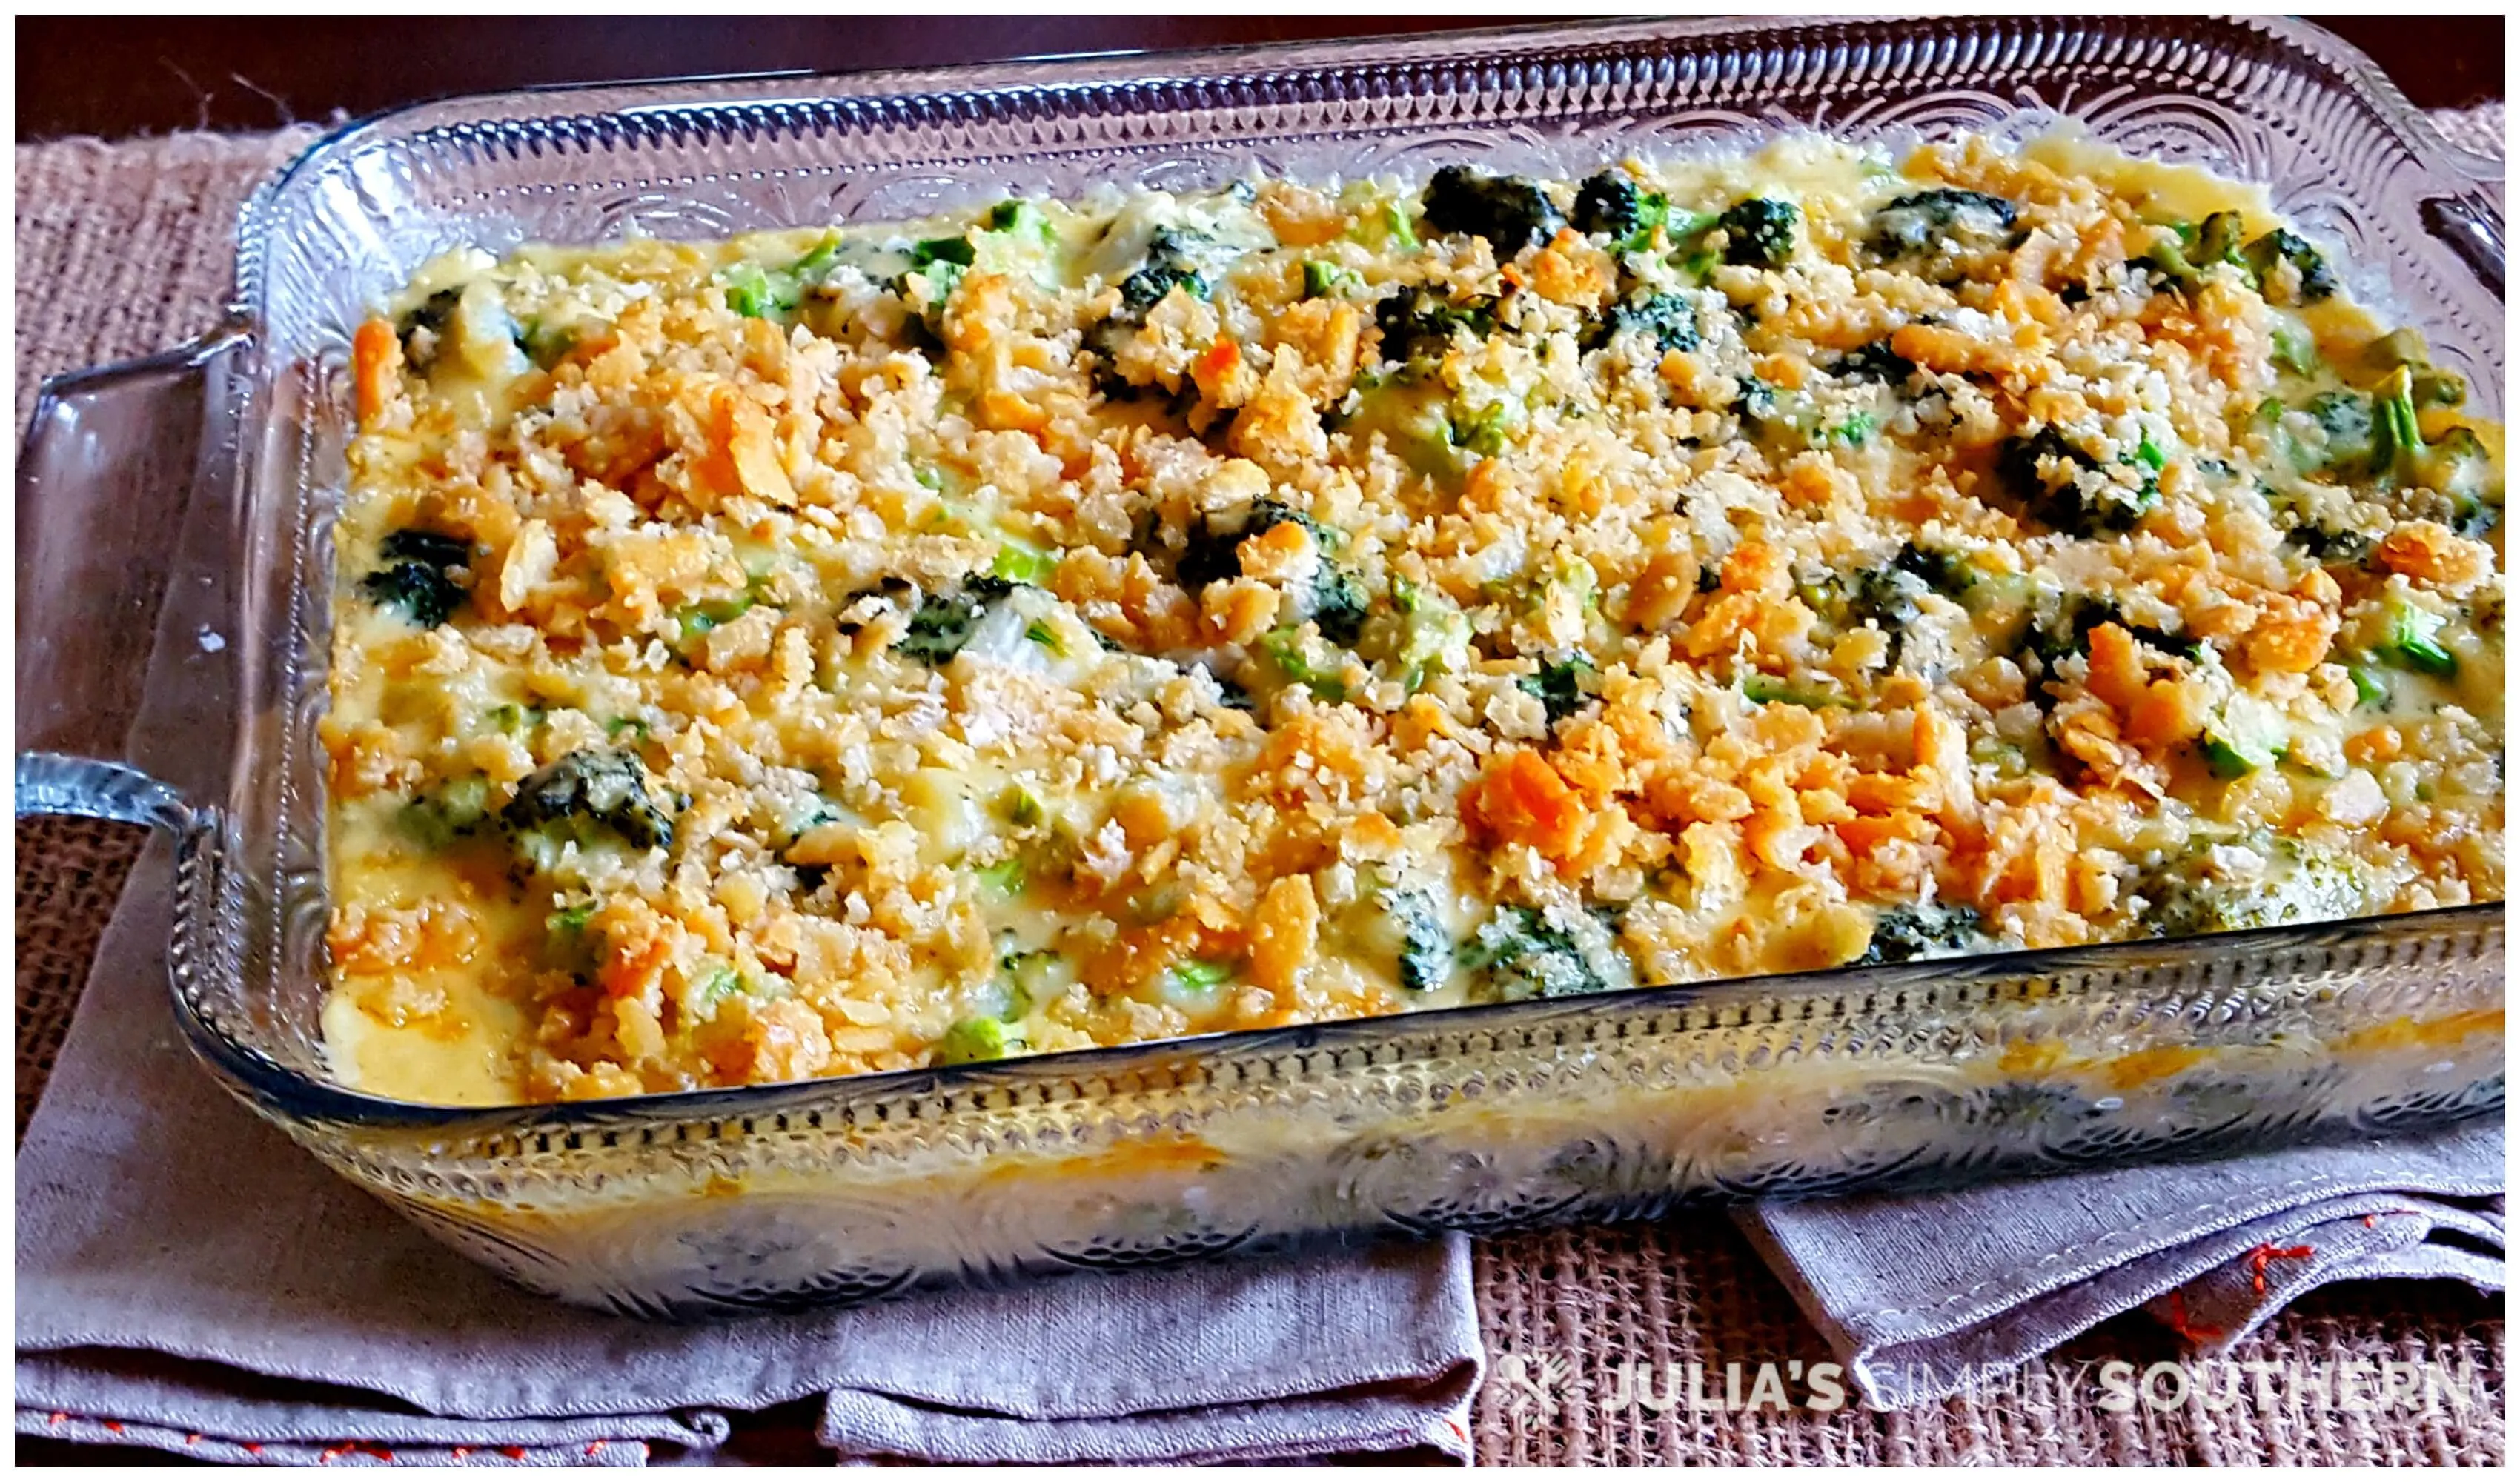 Glass casserole dish with baked broccoli and cheese topped with Ritz